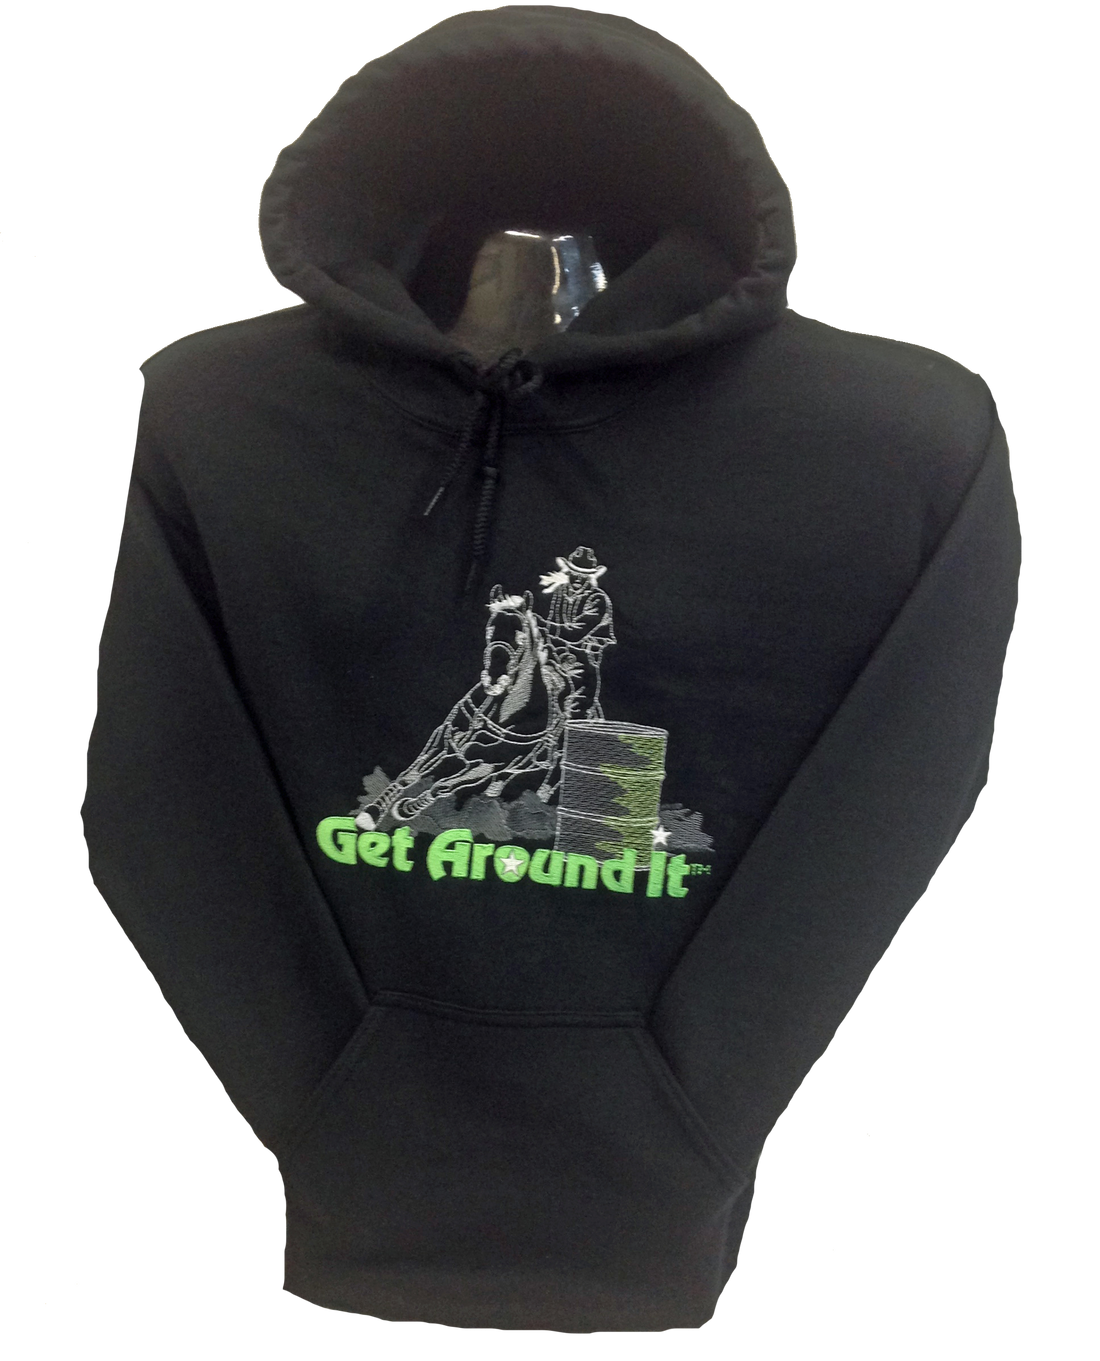 Get Around It Pullover Hoody